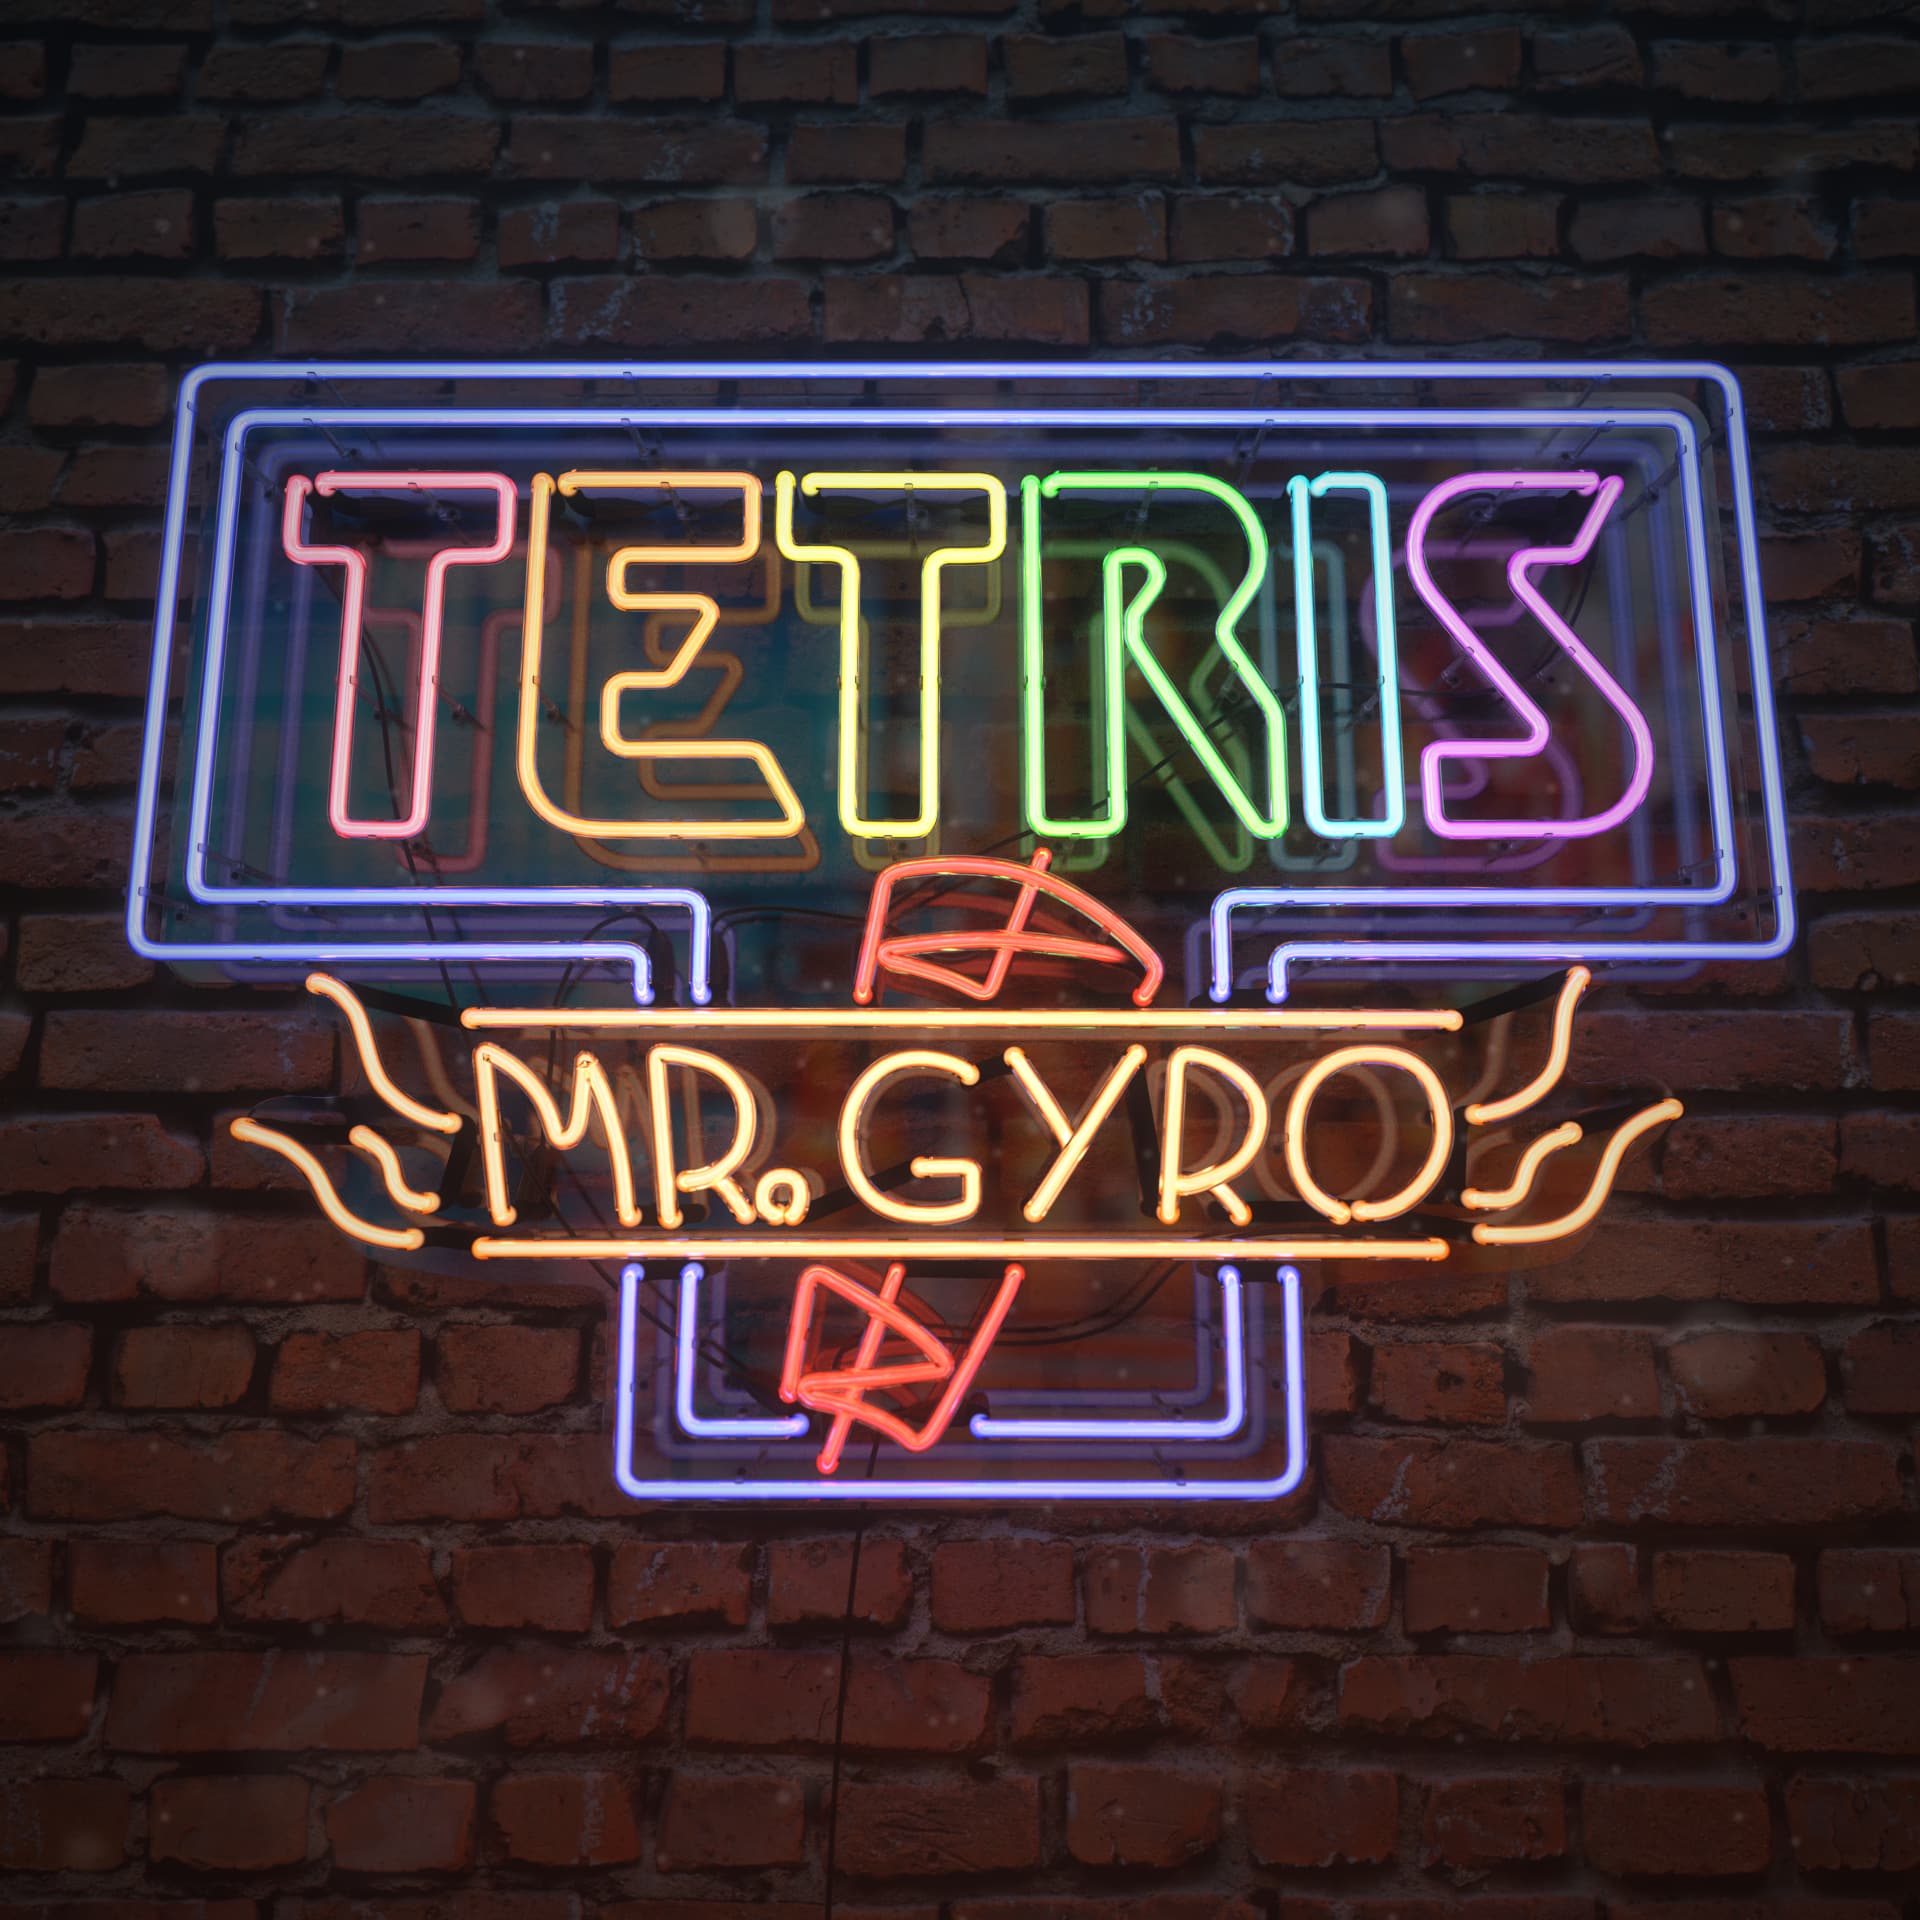 A 3D render of a neon sign of a Tetris logo with the subtitle Mr. Gyro.